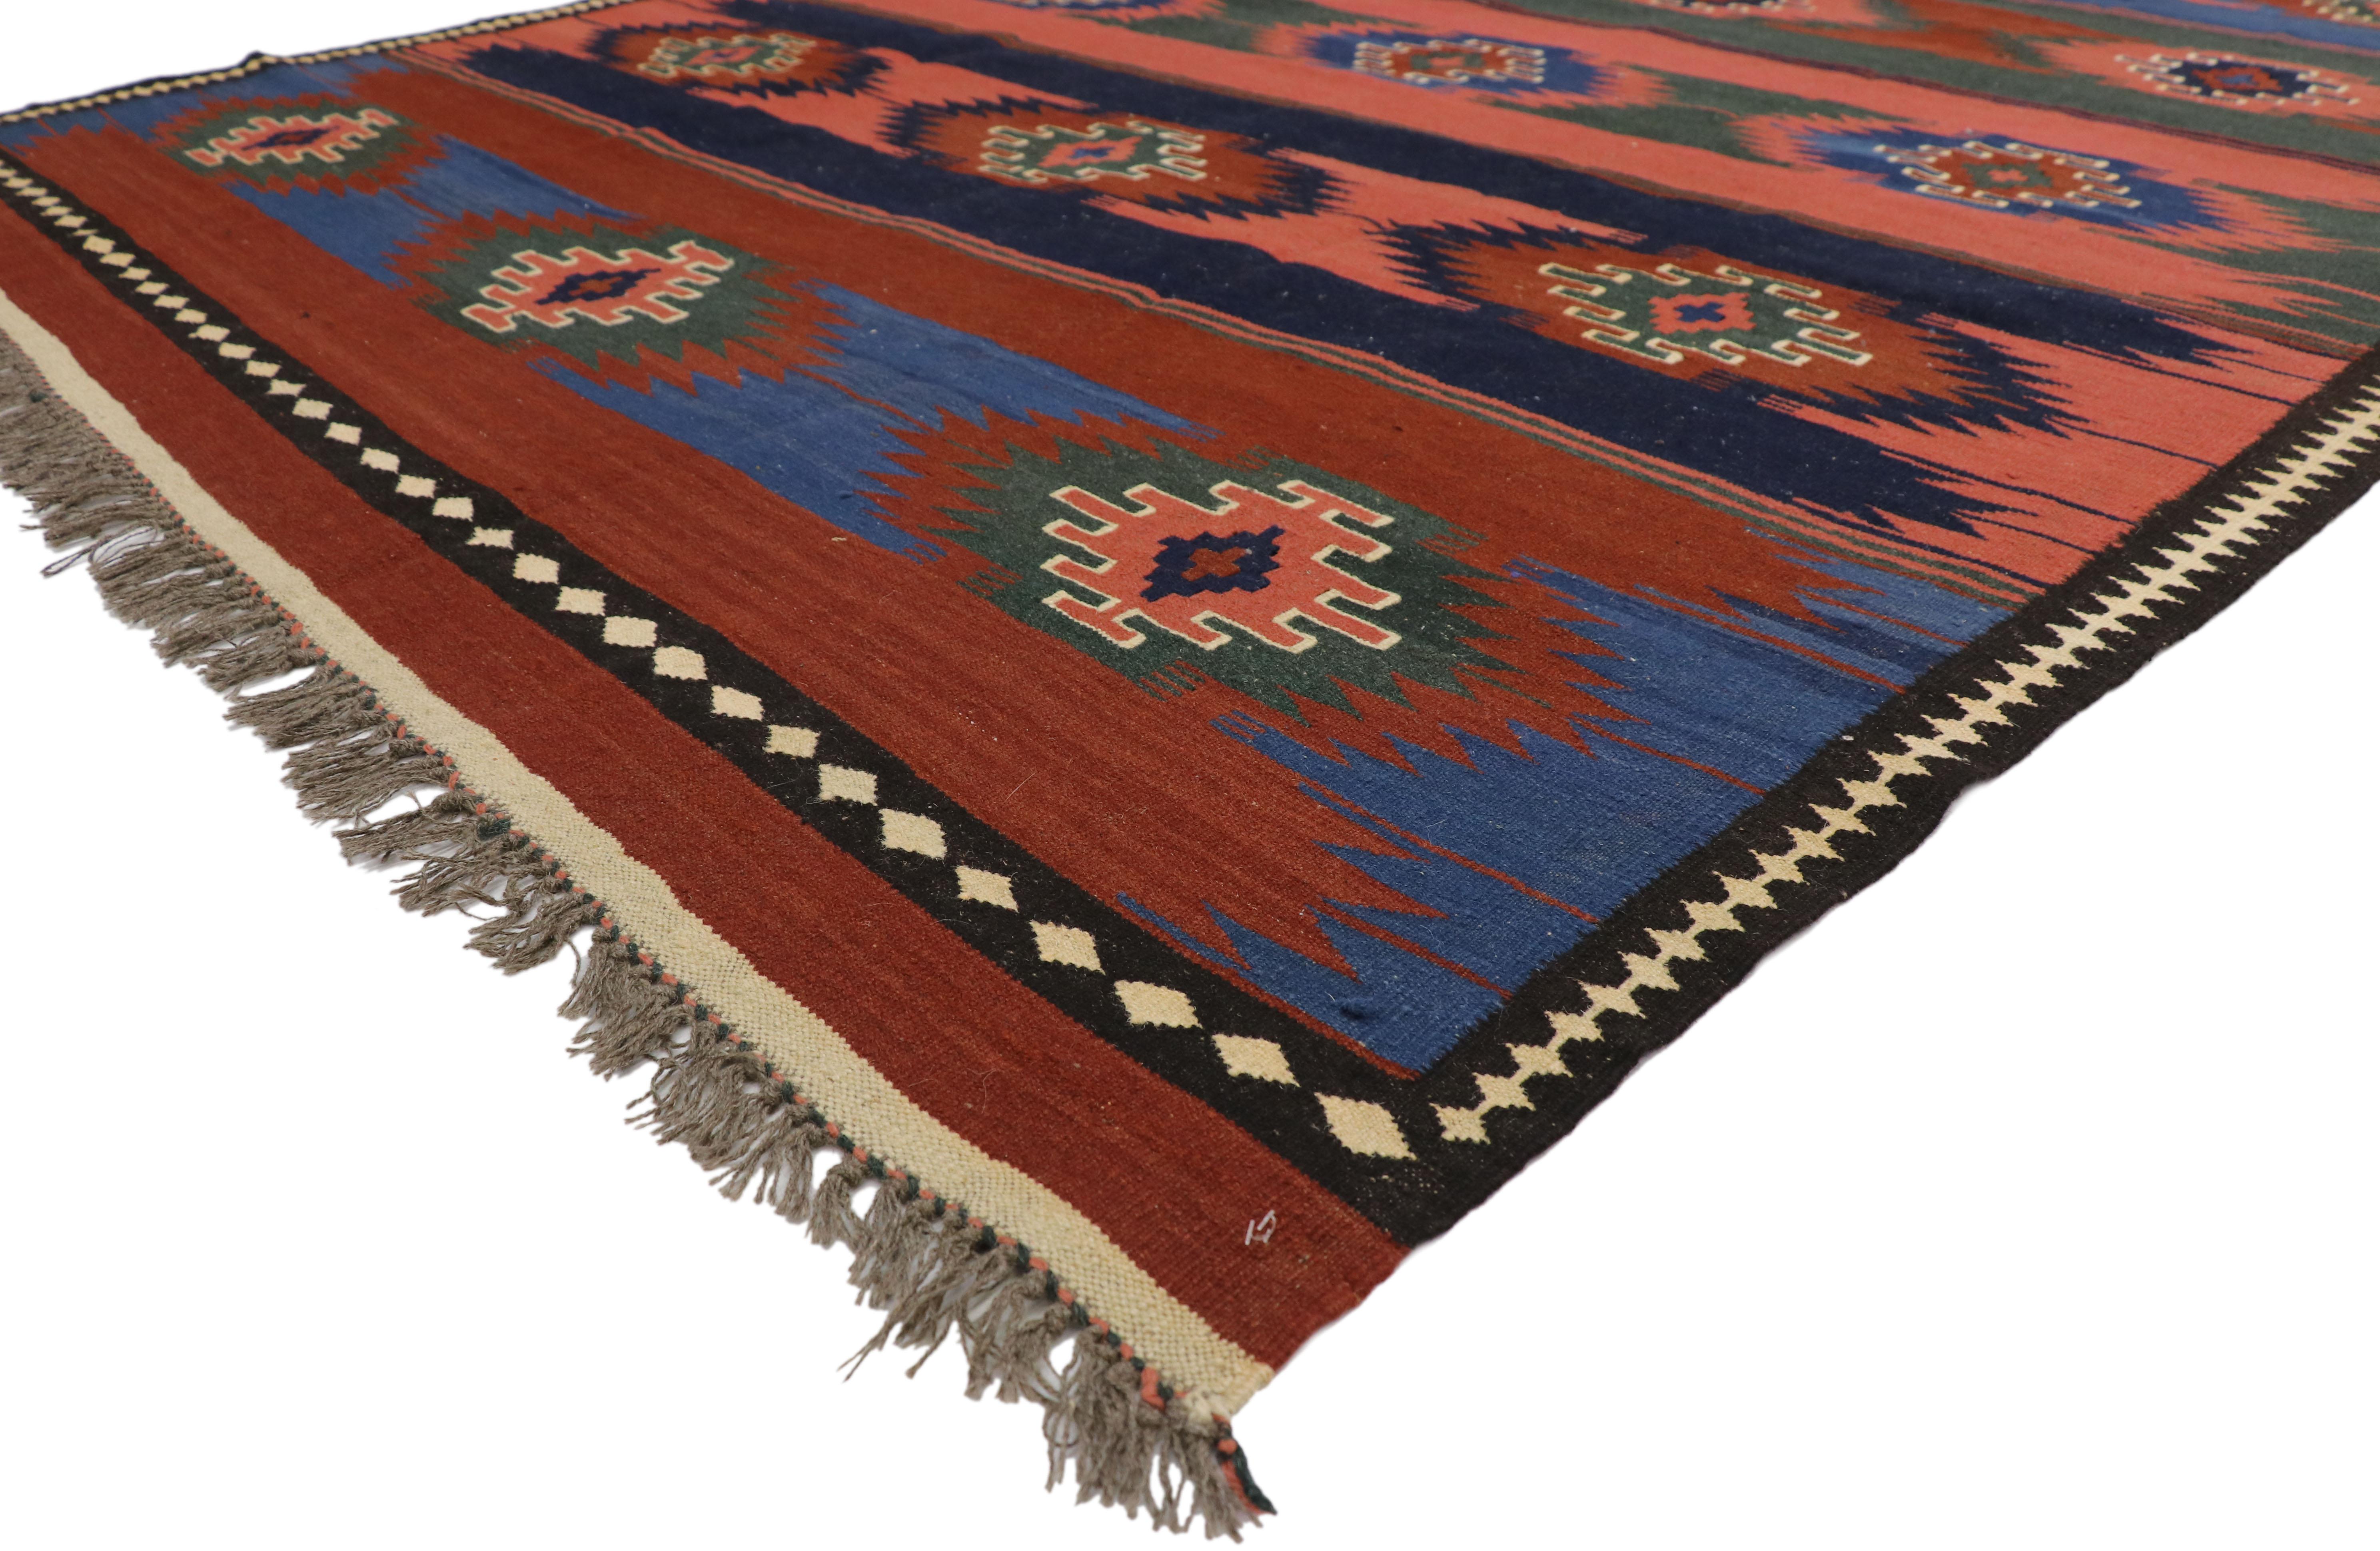 72157, vintage Afghani Kilim rug with Southwestern Navajo Native American style. This handwoven wool vintage Afghani kilim rug with Southwestern Navajo style features six rows of three amulets with stepped edges. Each amulet is filled with a